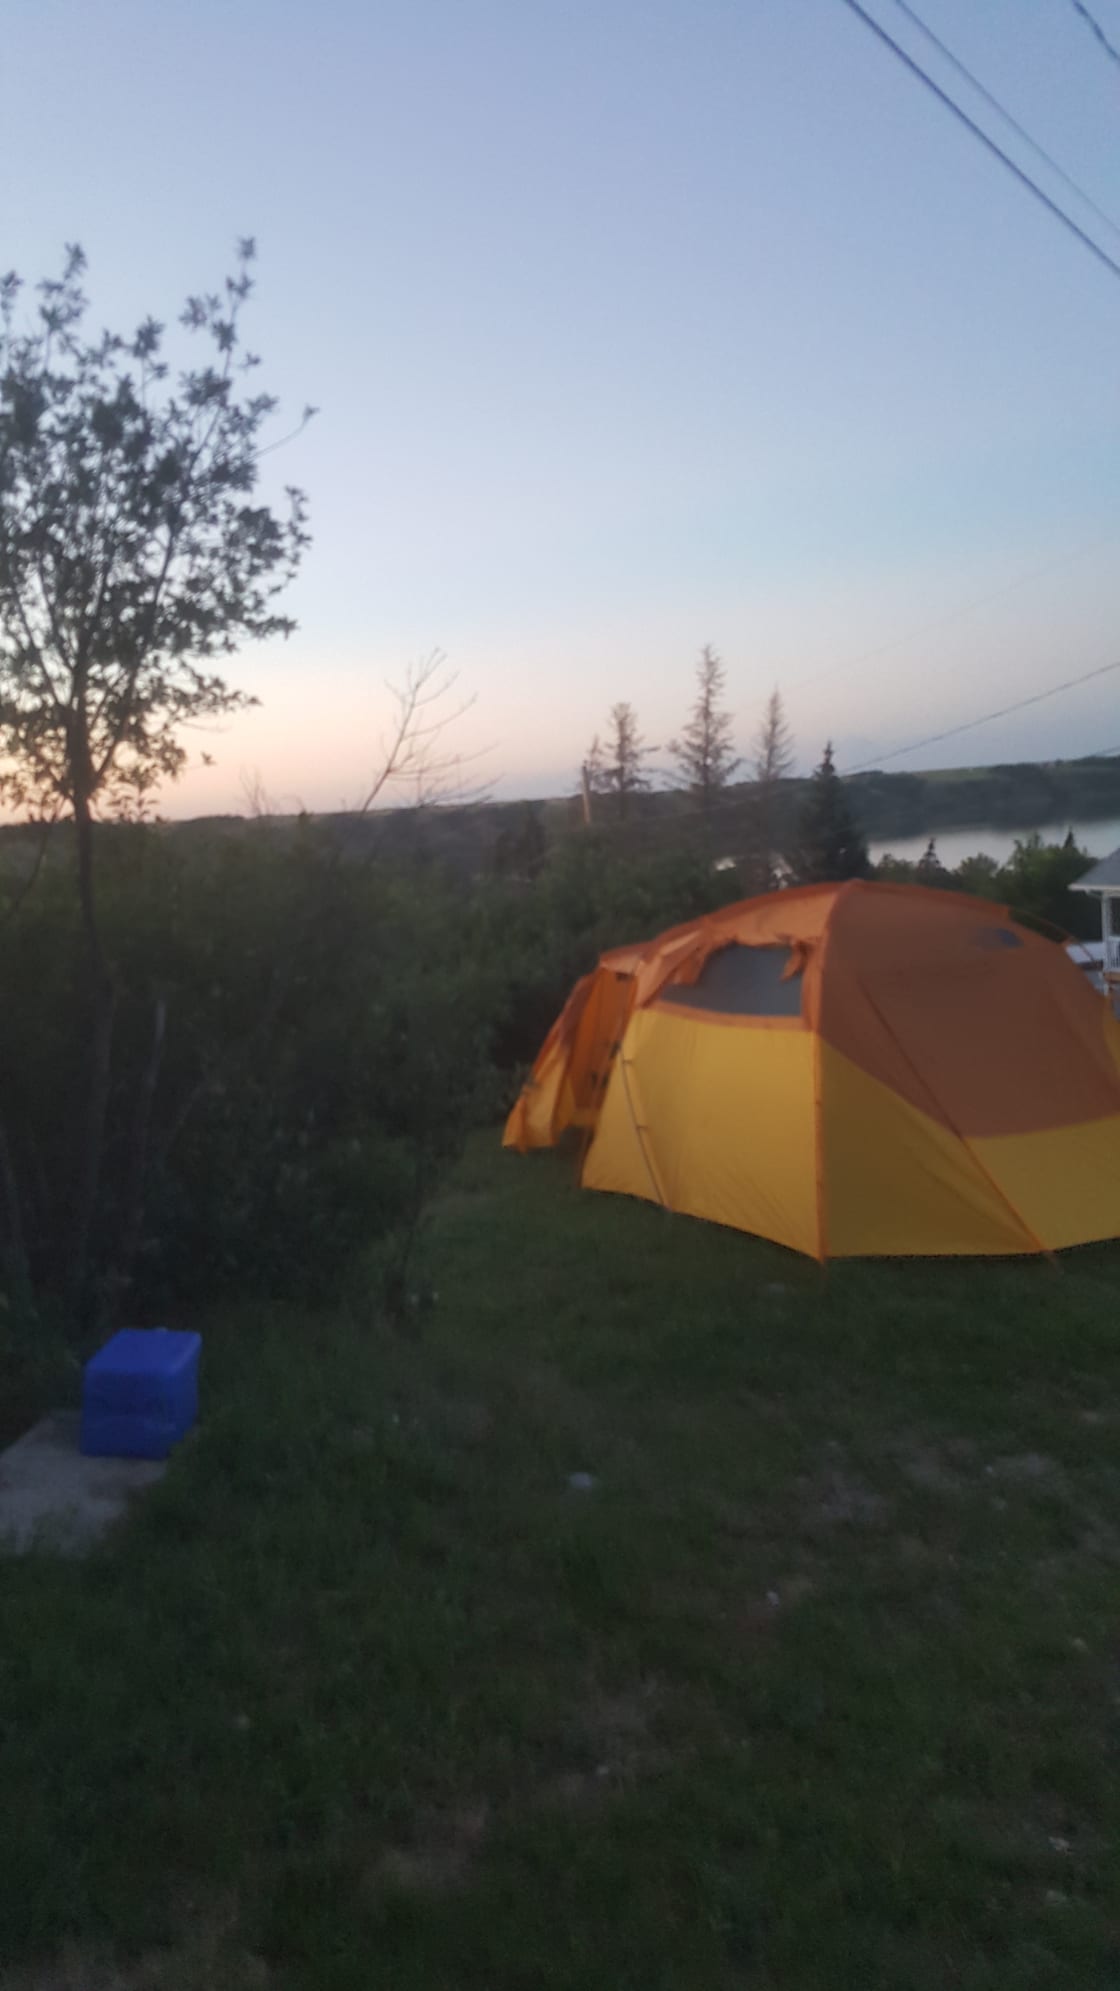 Pitch your tent or park your RV here to enjoy the lake view and early morning sunrises